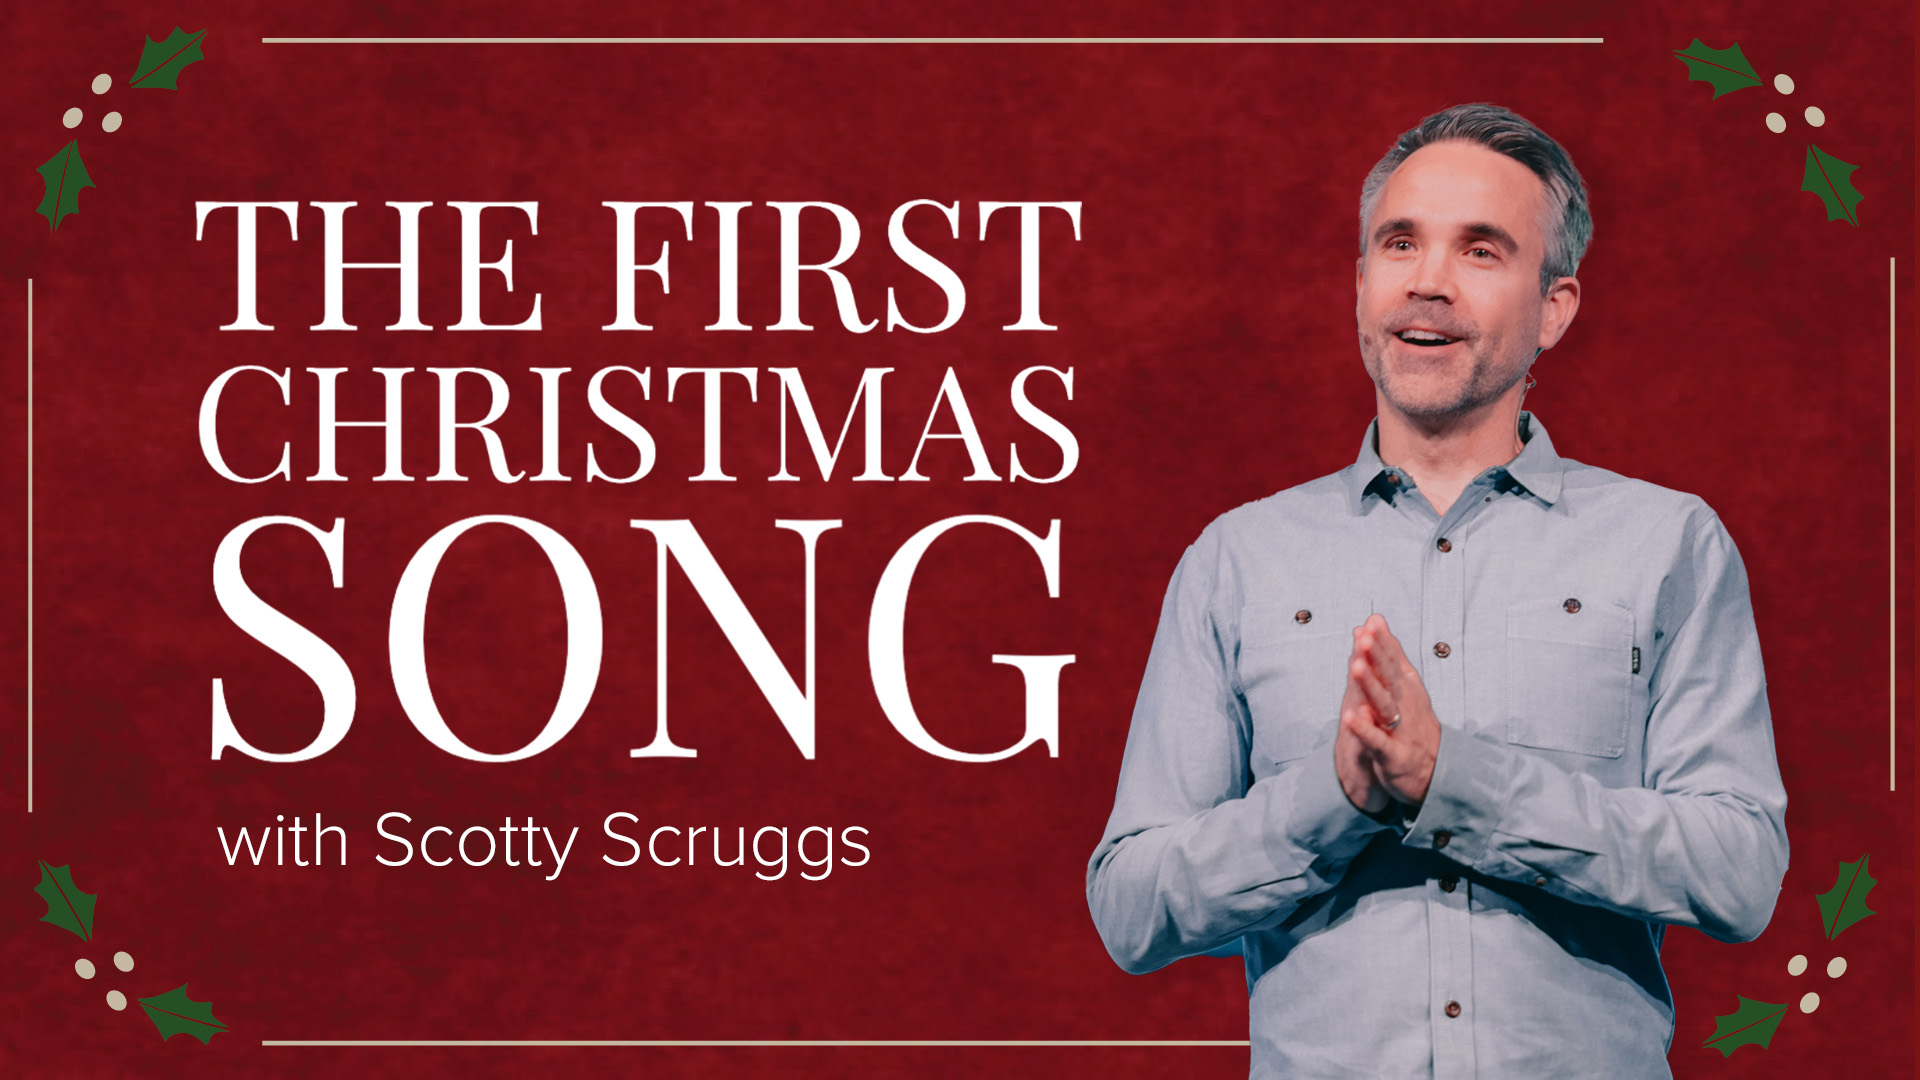 The First Christmas Song